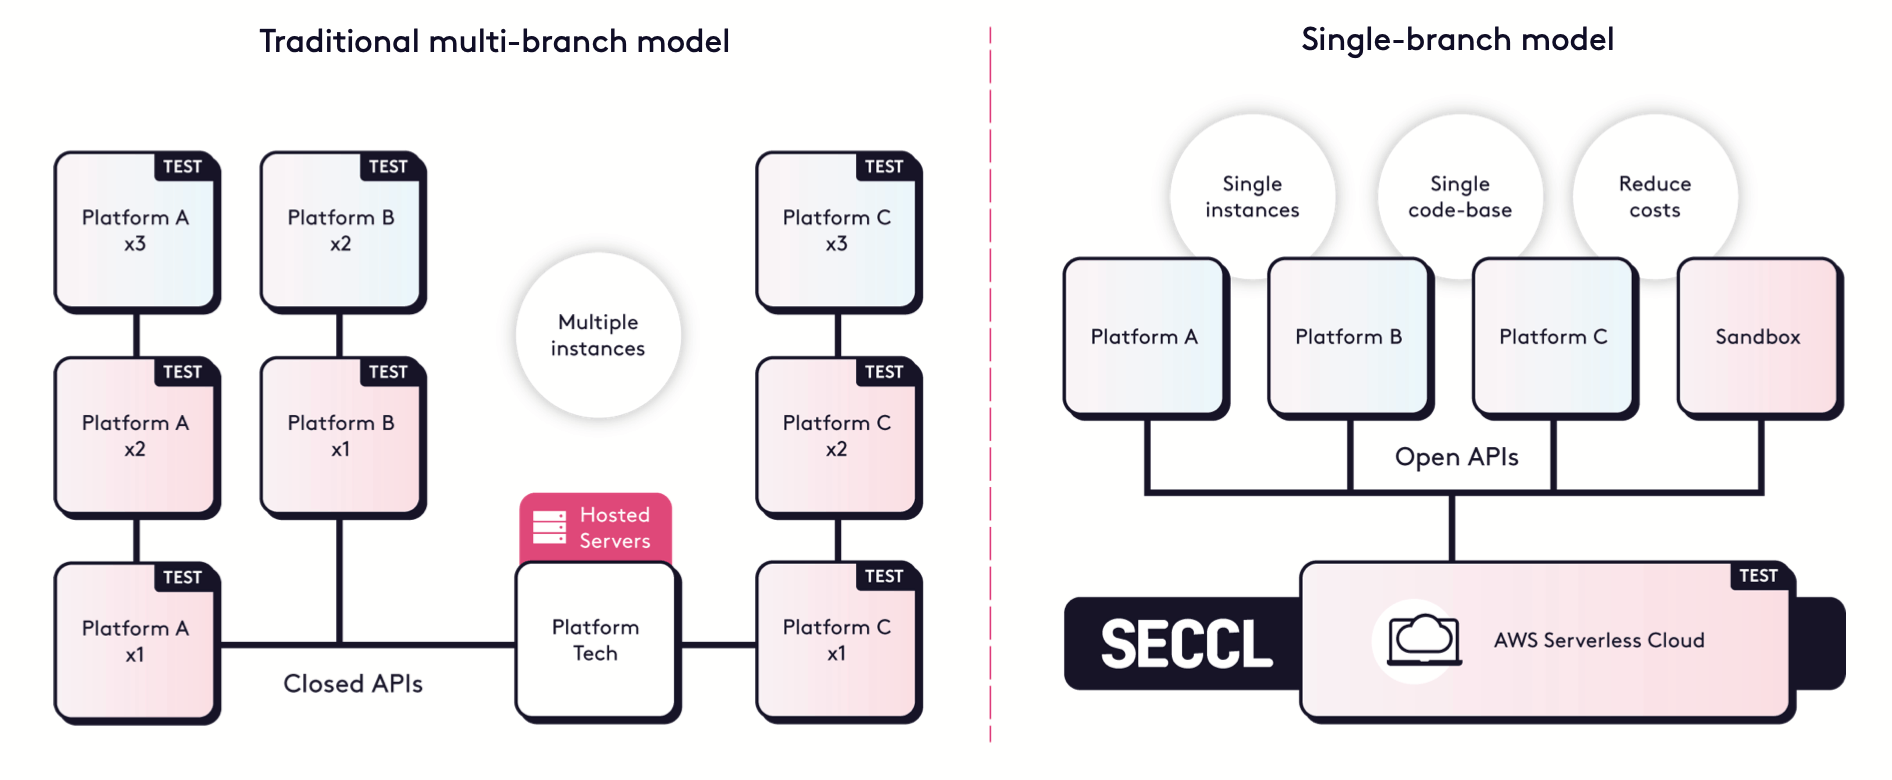 Traditional multi-branch model and Single-branch model